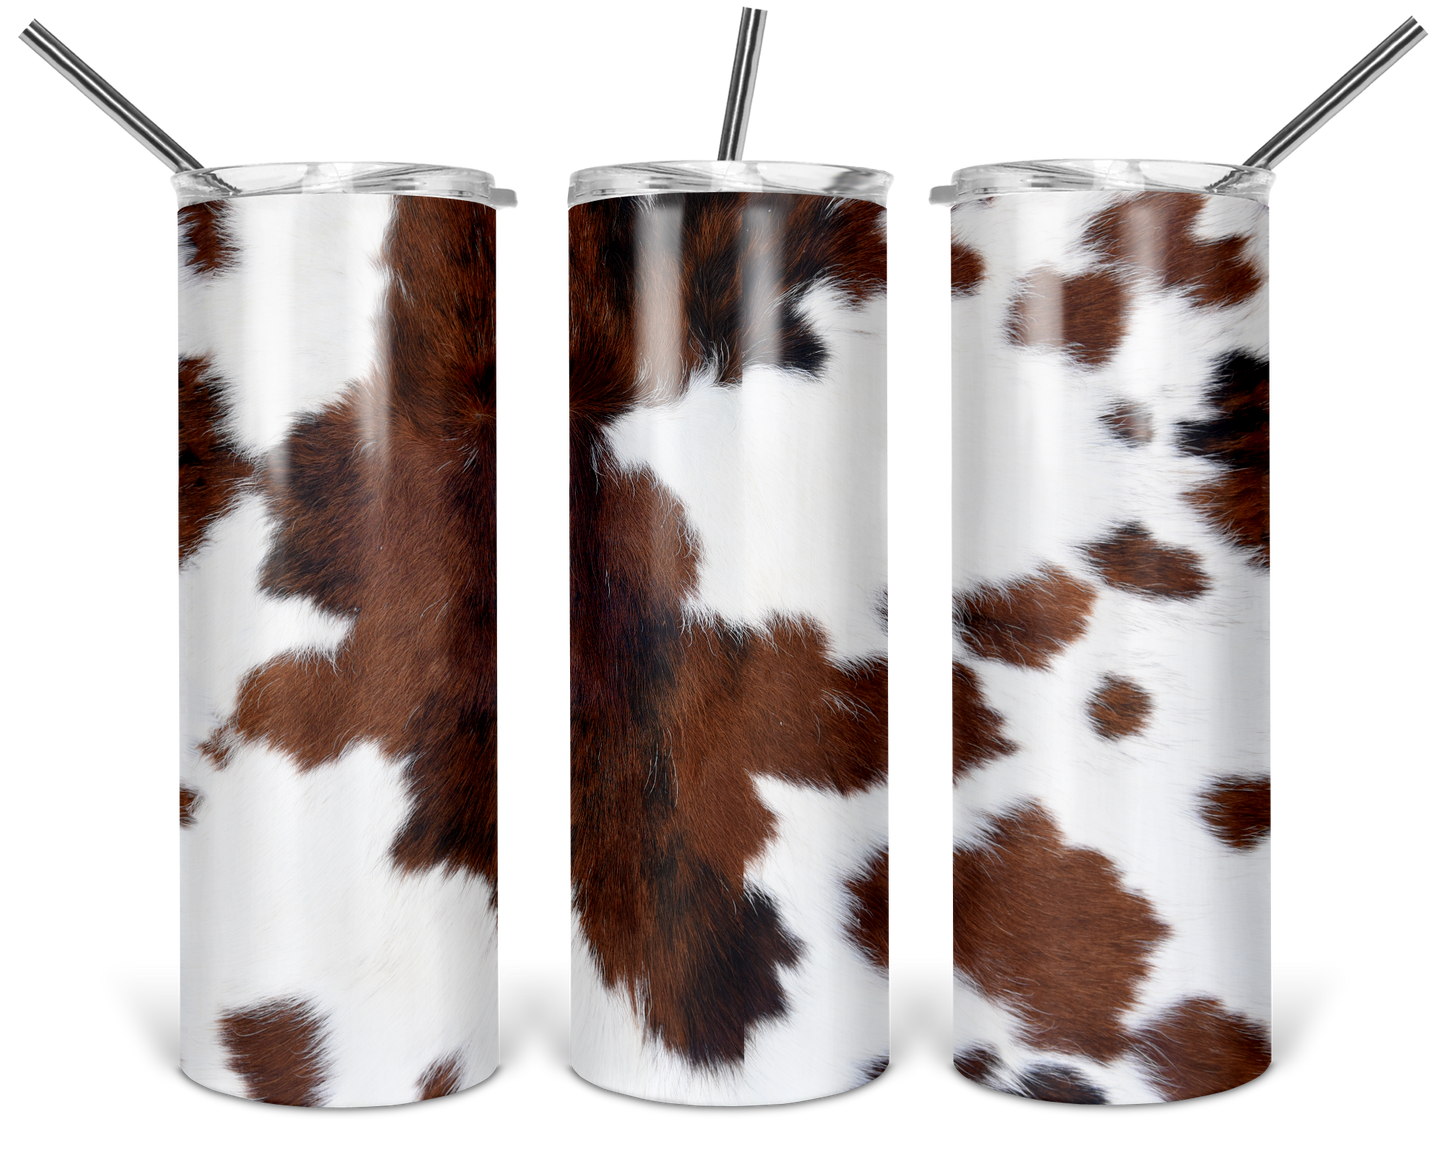 Cow Wrap For Straight Tumbler-M21